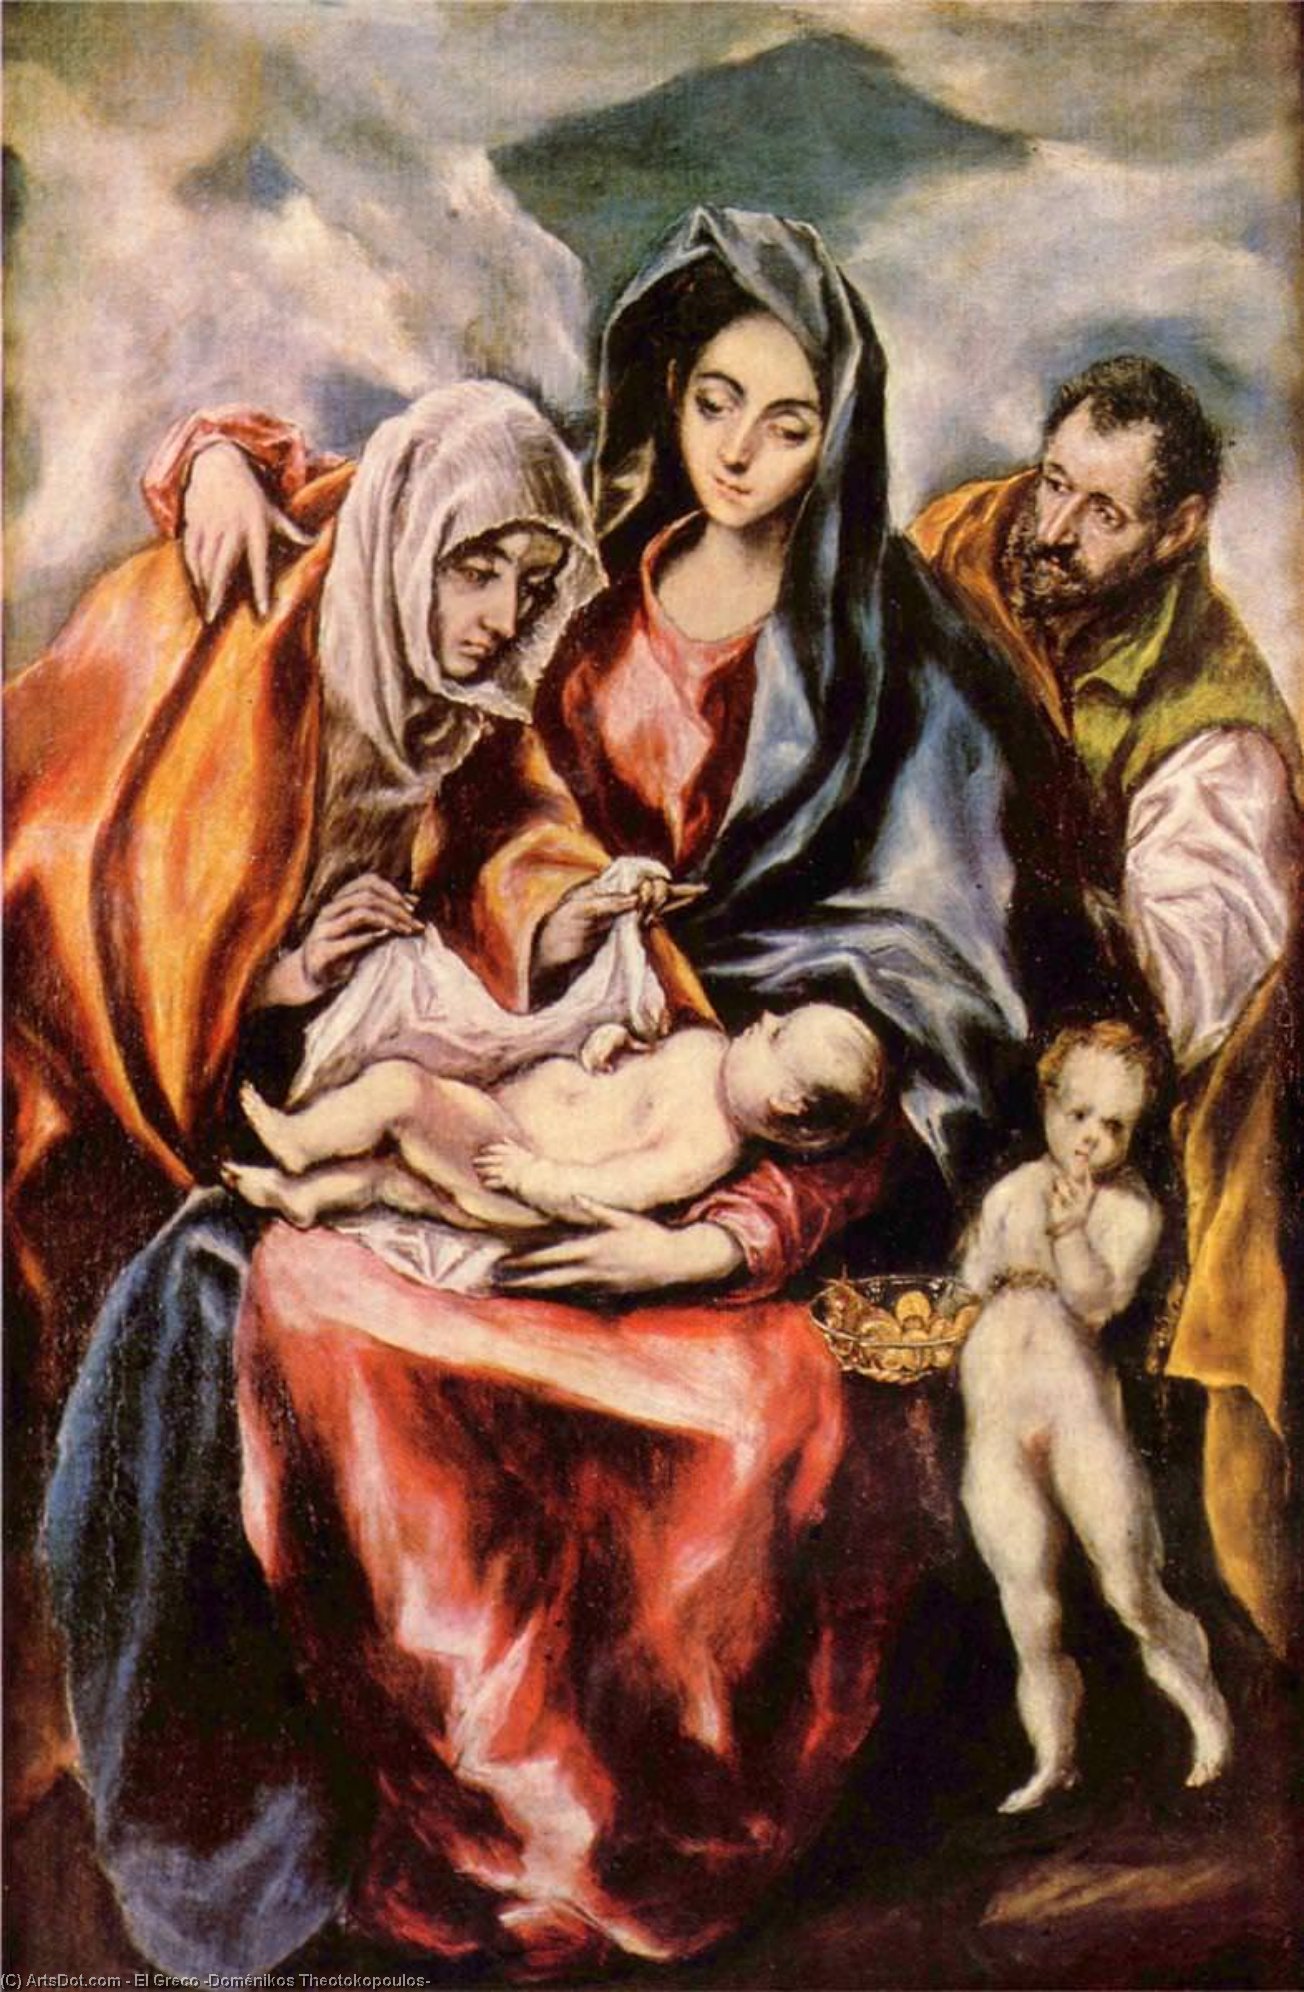 WikiOO.org - Encyclopedia of Fine Arts - Malba, Artwork El Greco (Doménikos Theotokopoulos) - The Holy Family with St. Anne and the Young St. John the Baptist